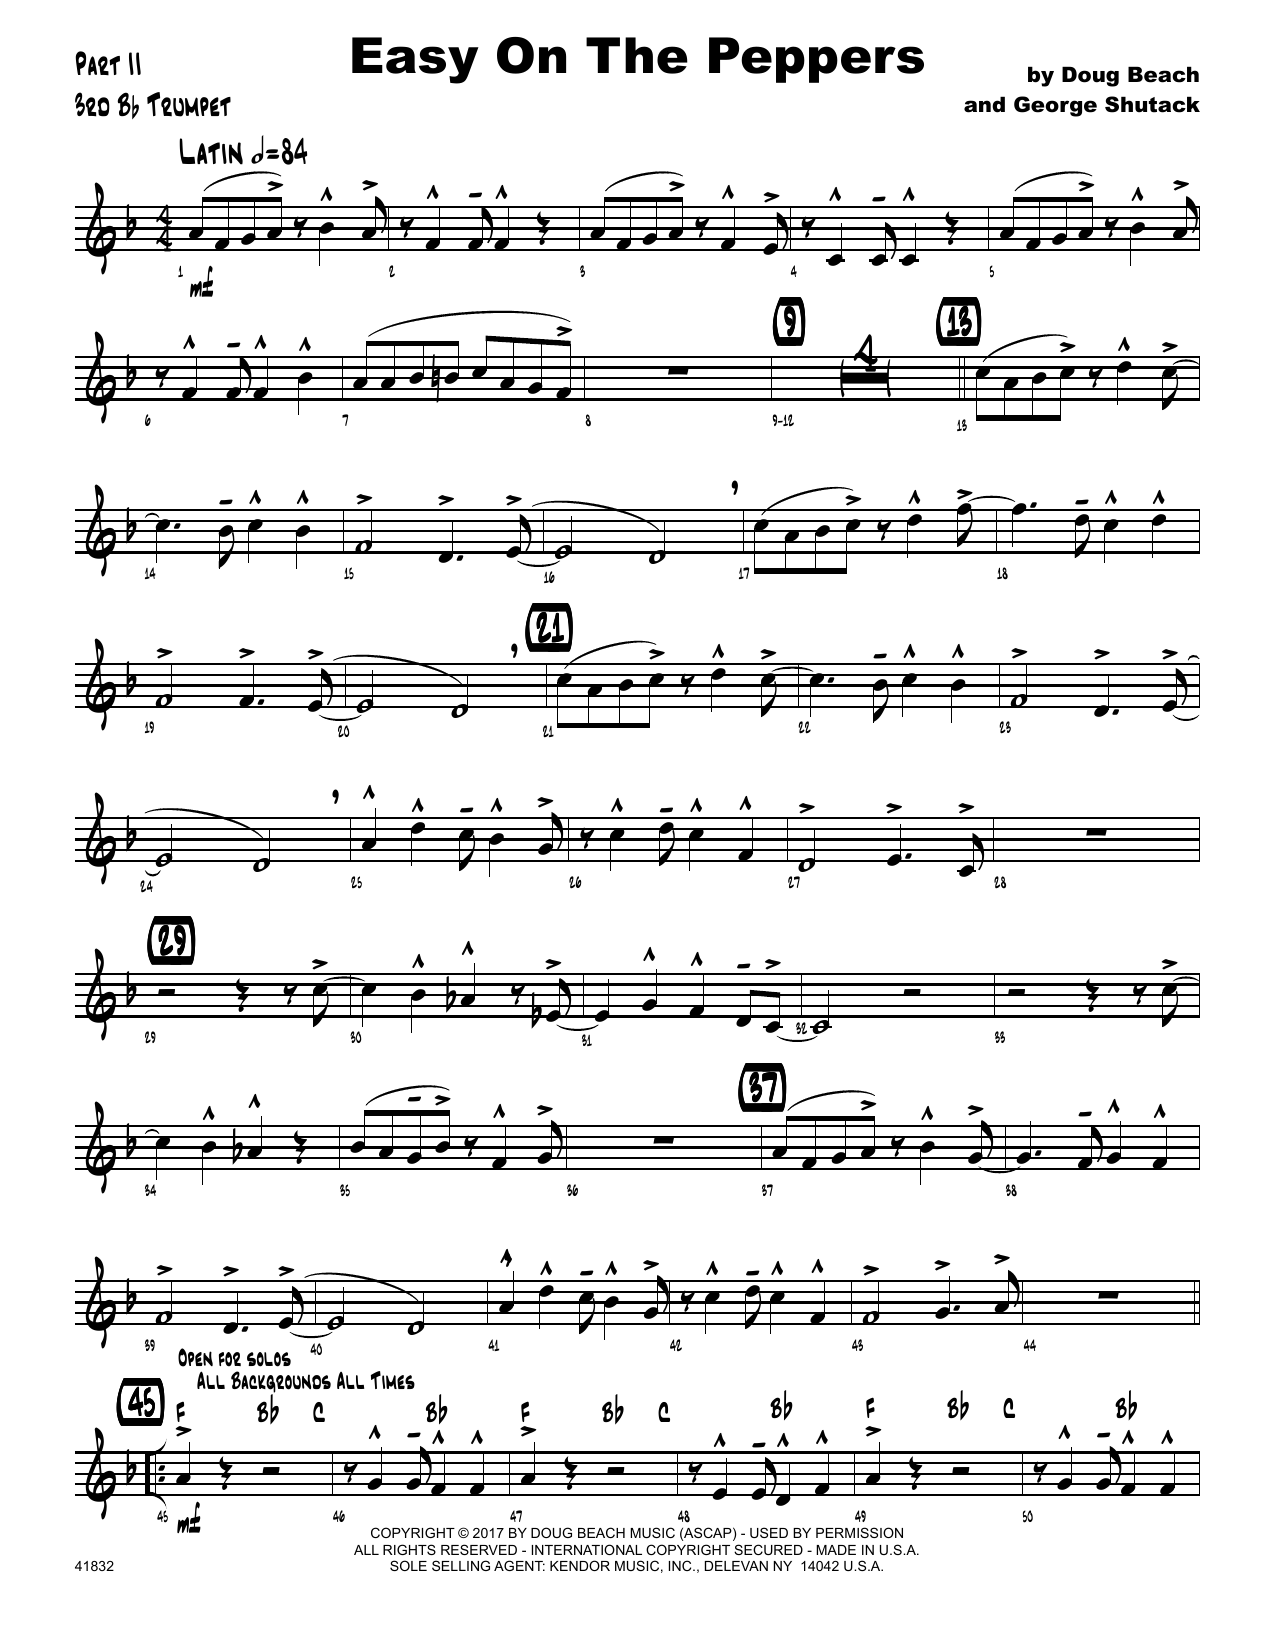 Download Doug Beach & George Shutack Easy On The Peppers - 3rd Bb Trumpet Sheet Music